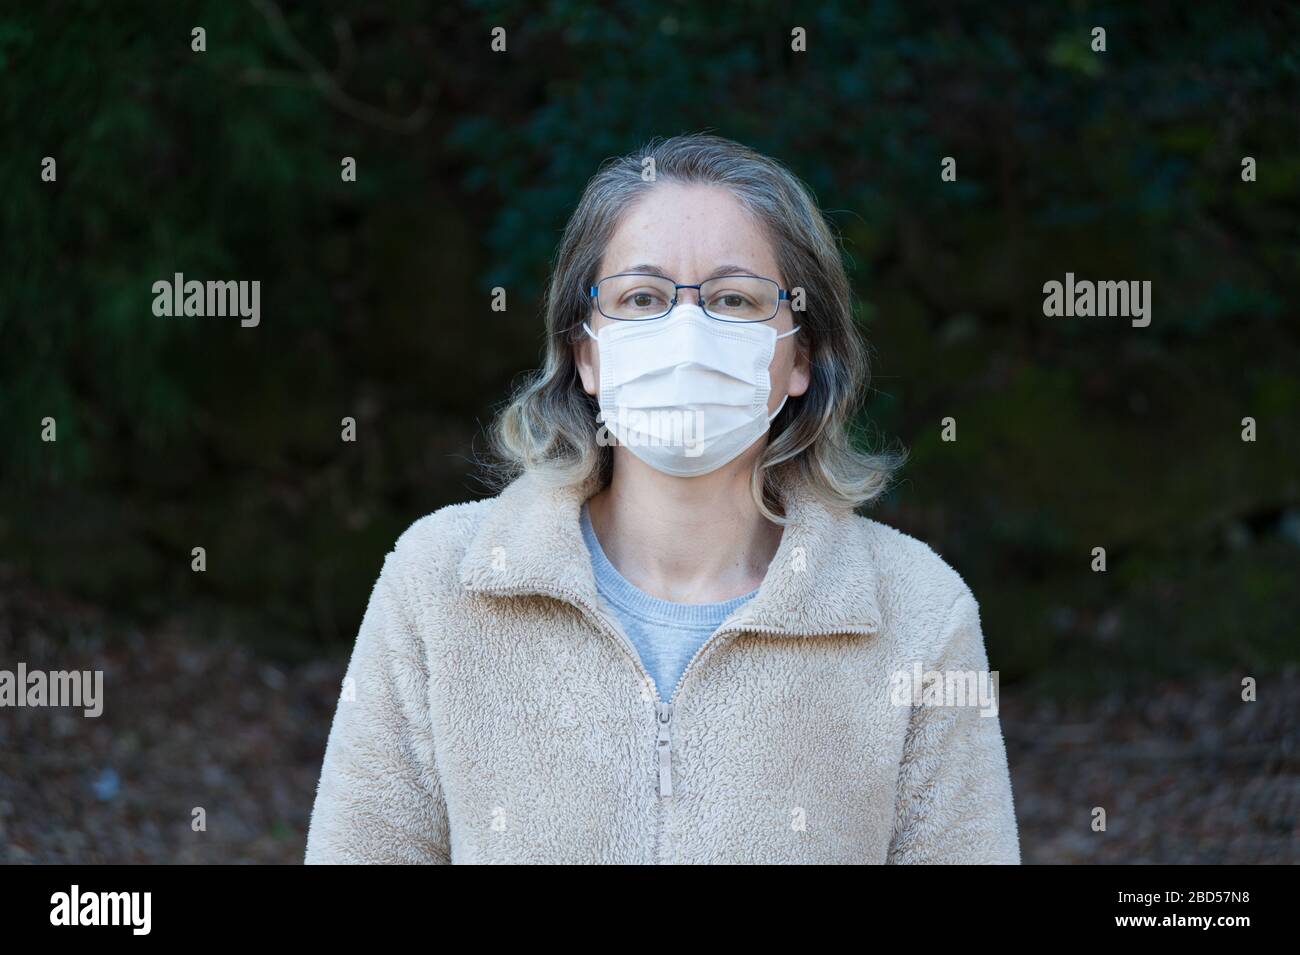 Woman 40-49 years outdoors, wearing glasses and white mask for protection against Coronavirus COVID-19 (SARS-CoV-2) and other contagious diseases. Stock Photo